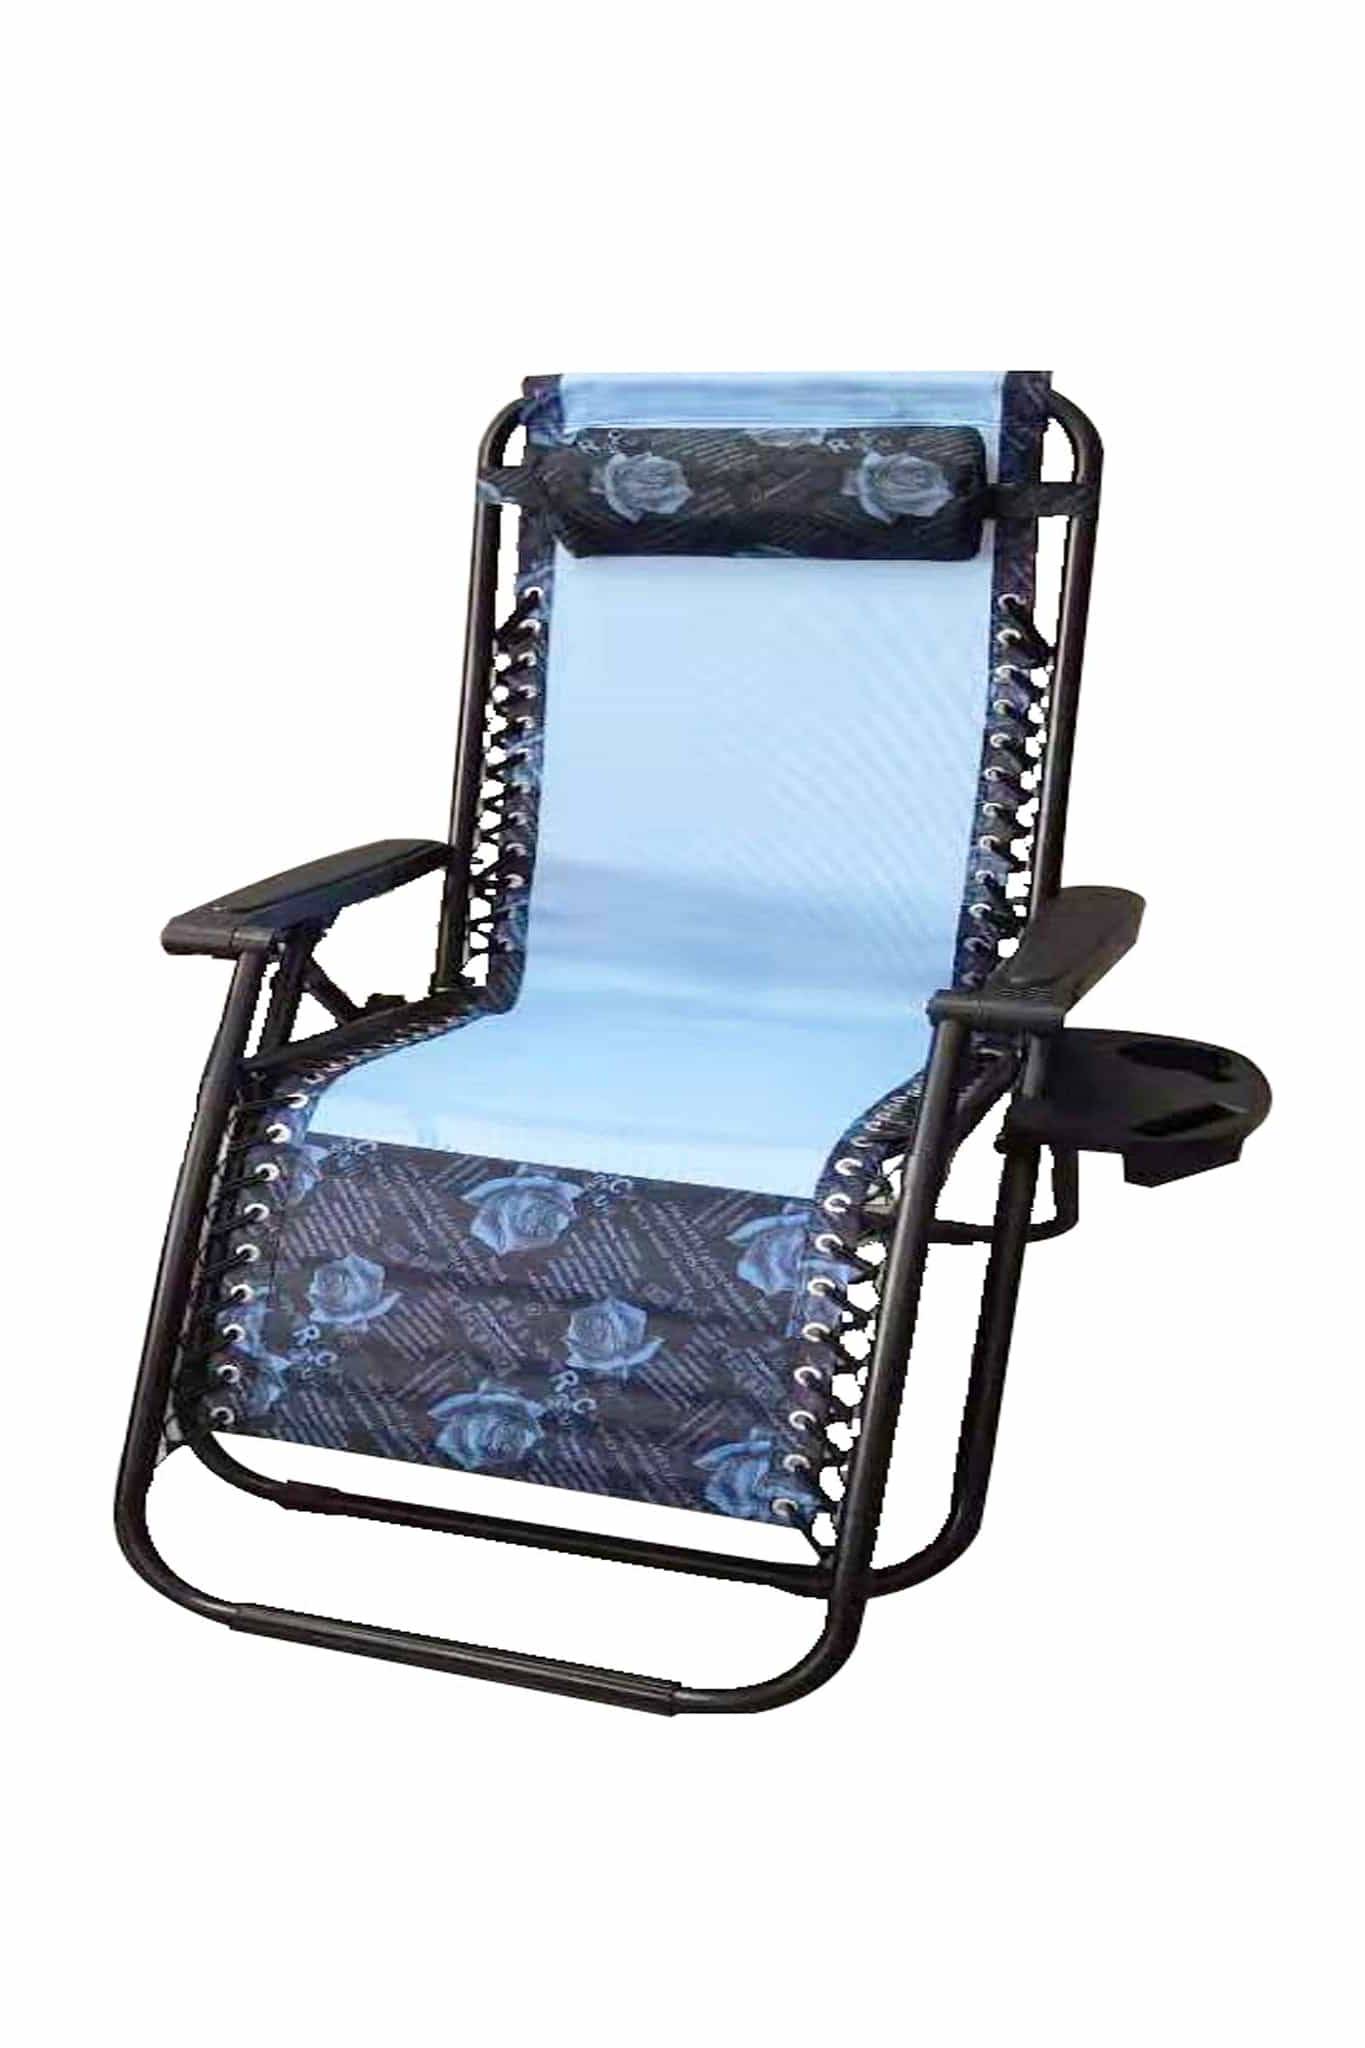 Blue & Rose Foldable Lounger Chair